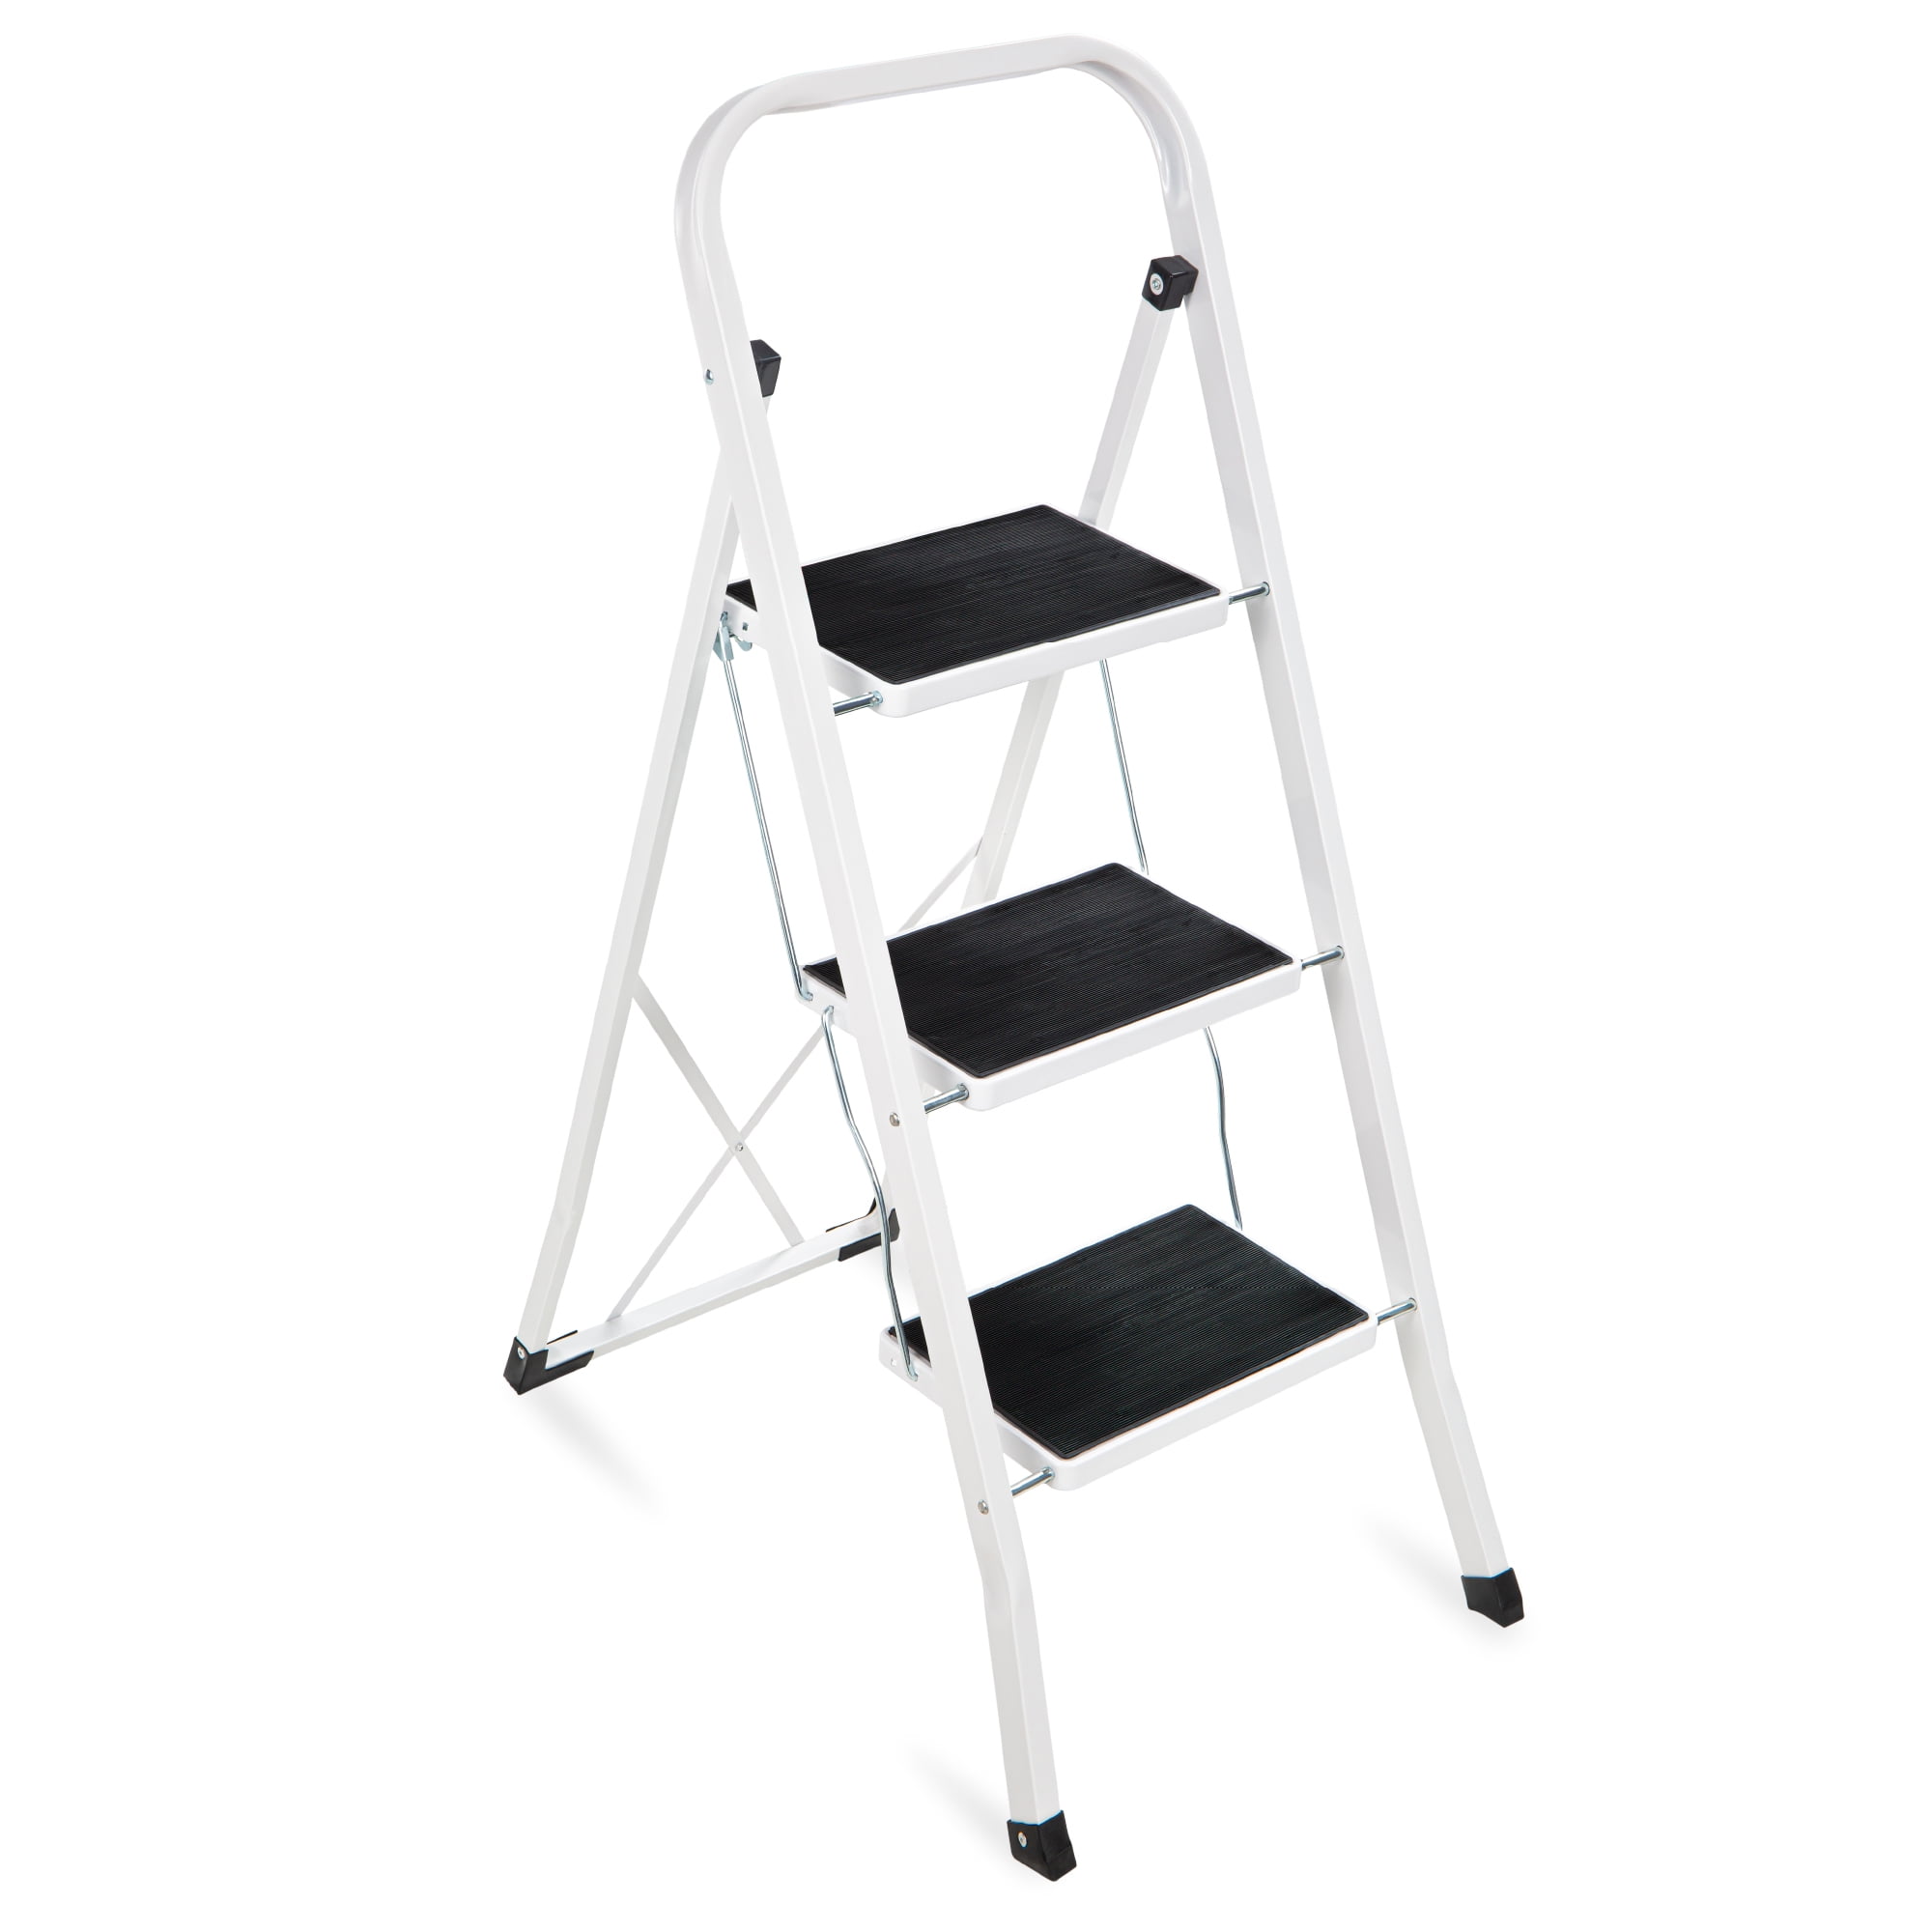 Space Saving Black Aluminum Lightweight Folding Step Shelf with Anti-Slip and Wide Pedal for Home and Kitchen Use 3 Steps Stool Ladder